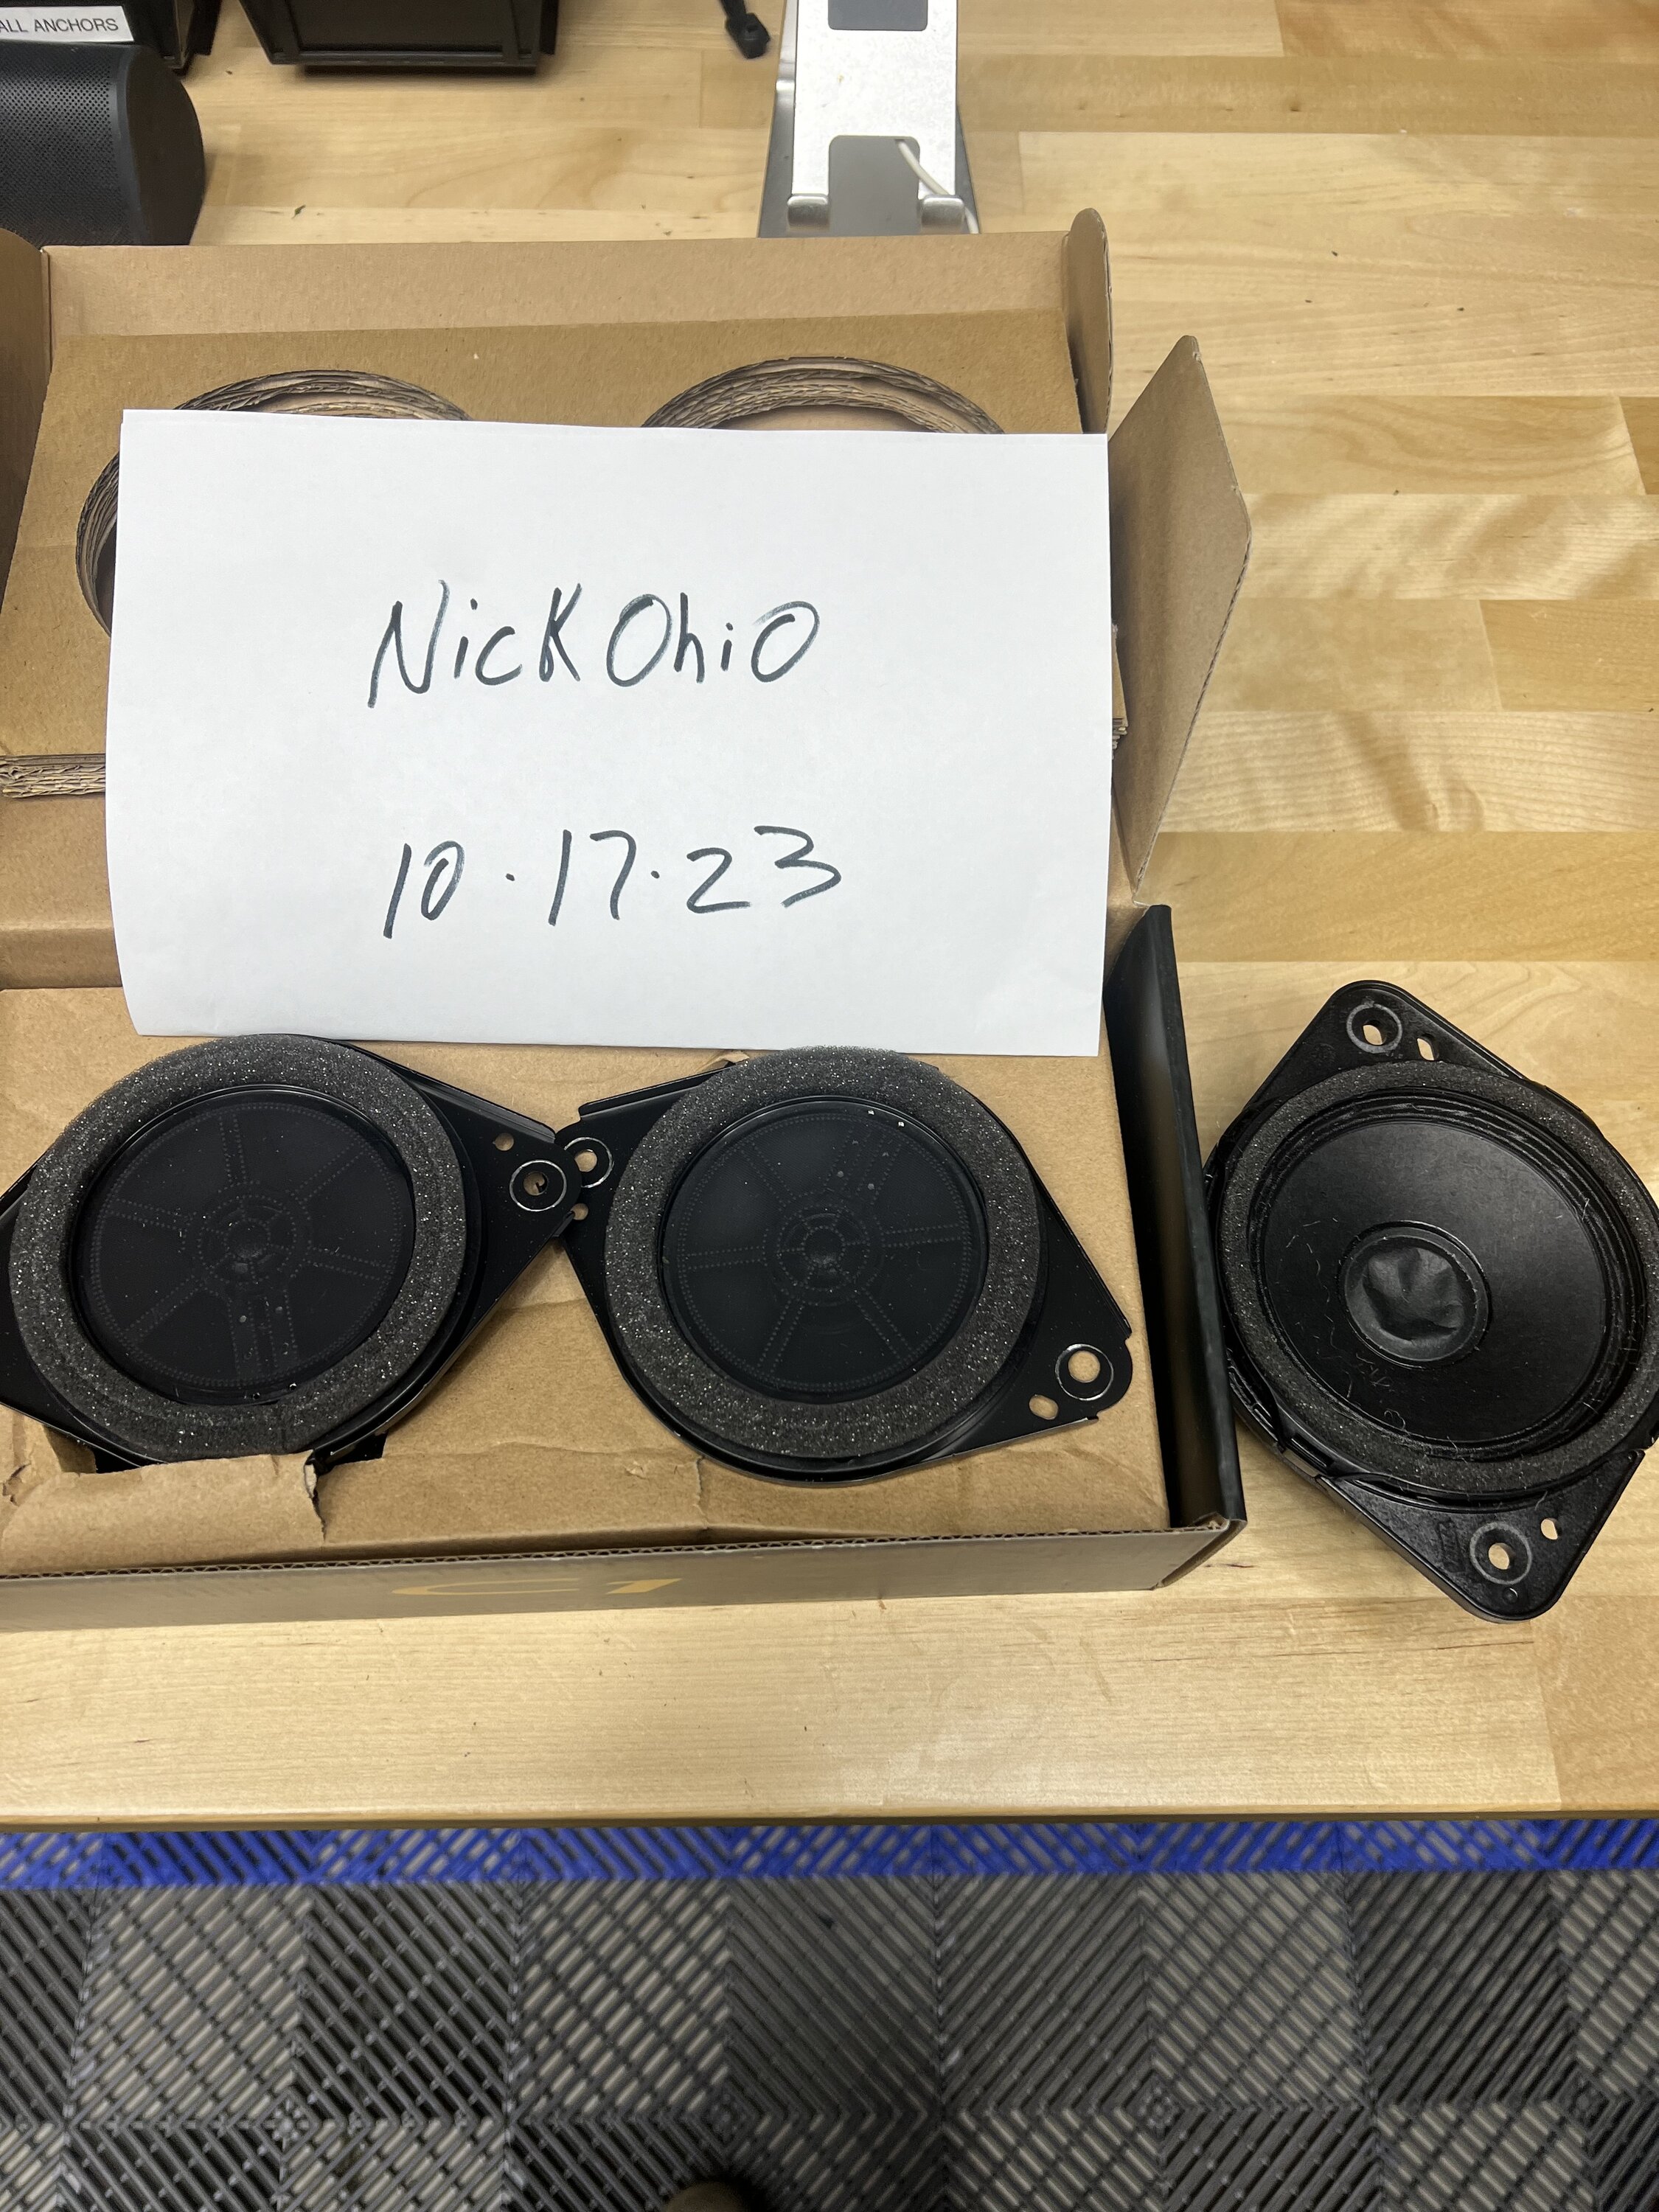 Ford Bronco B&O Speakers, barely used - $50 for all tempImagebClYVJ